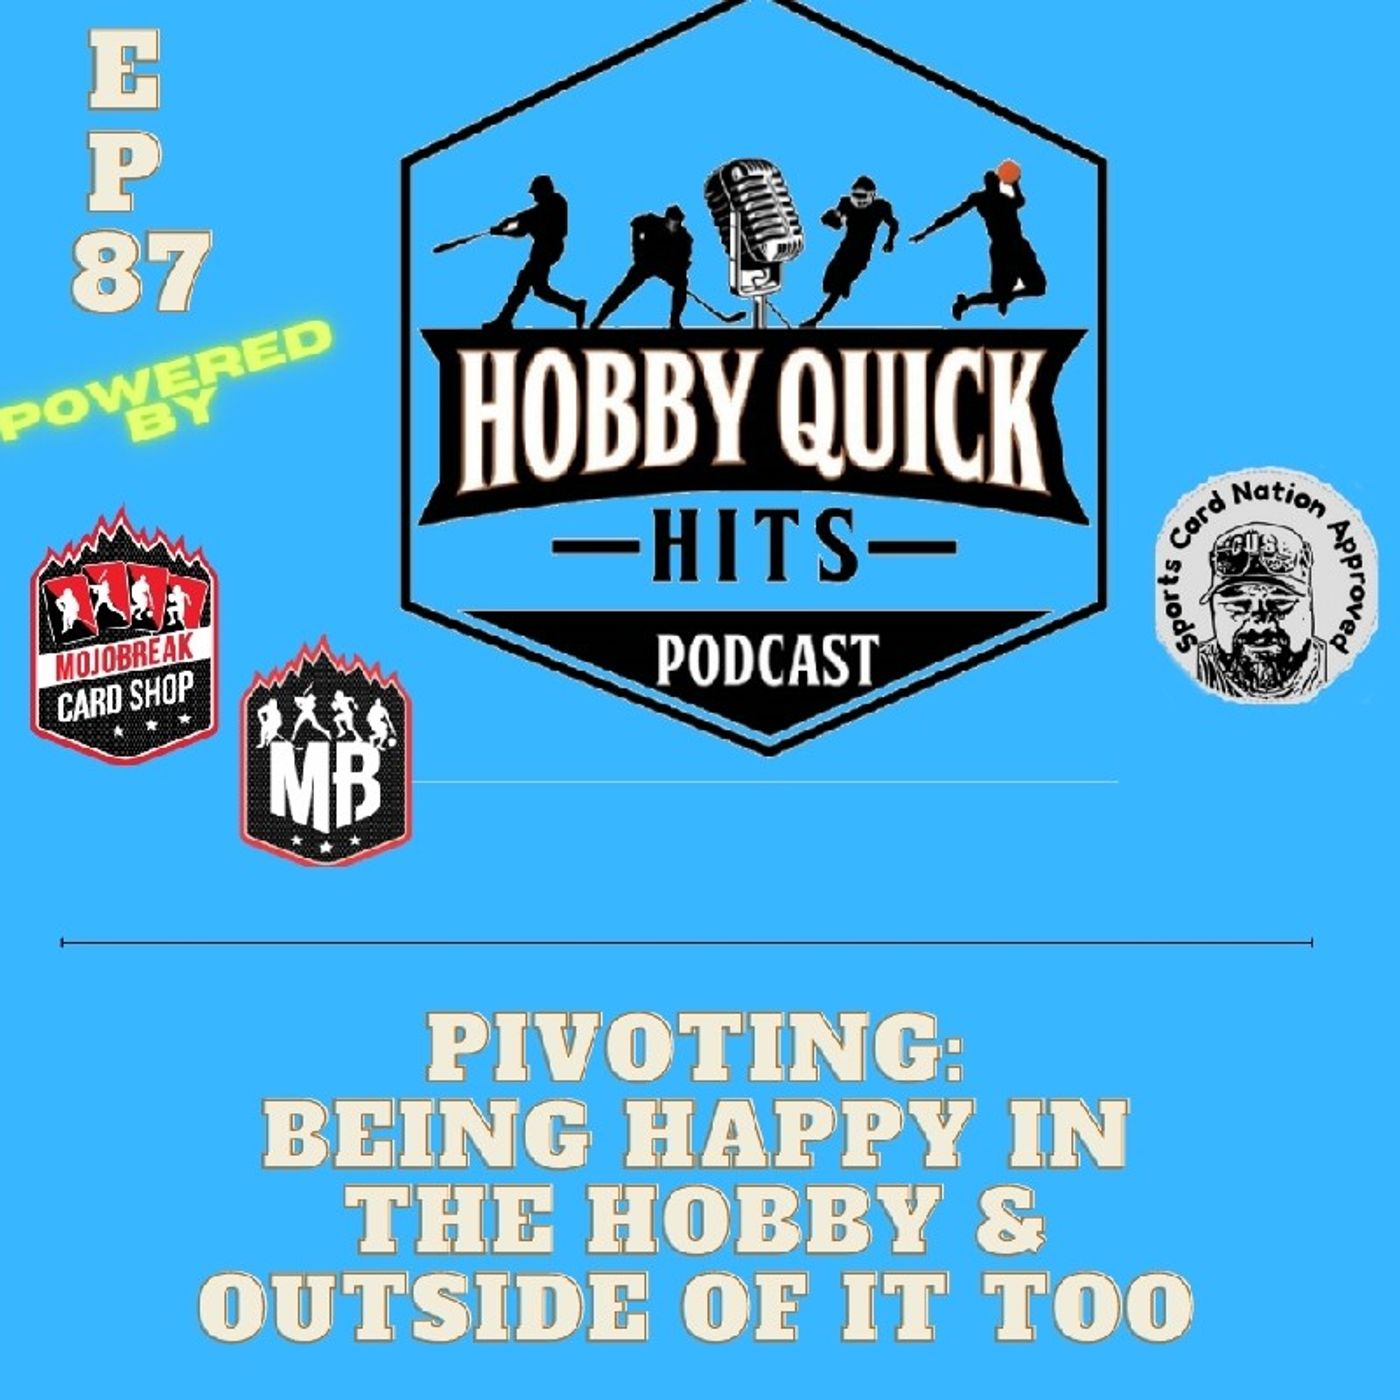 Hobby Quick Hits Ep.87 Pivoting: Being happy in the hobby & outside of it too